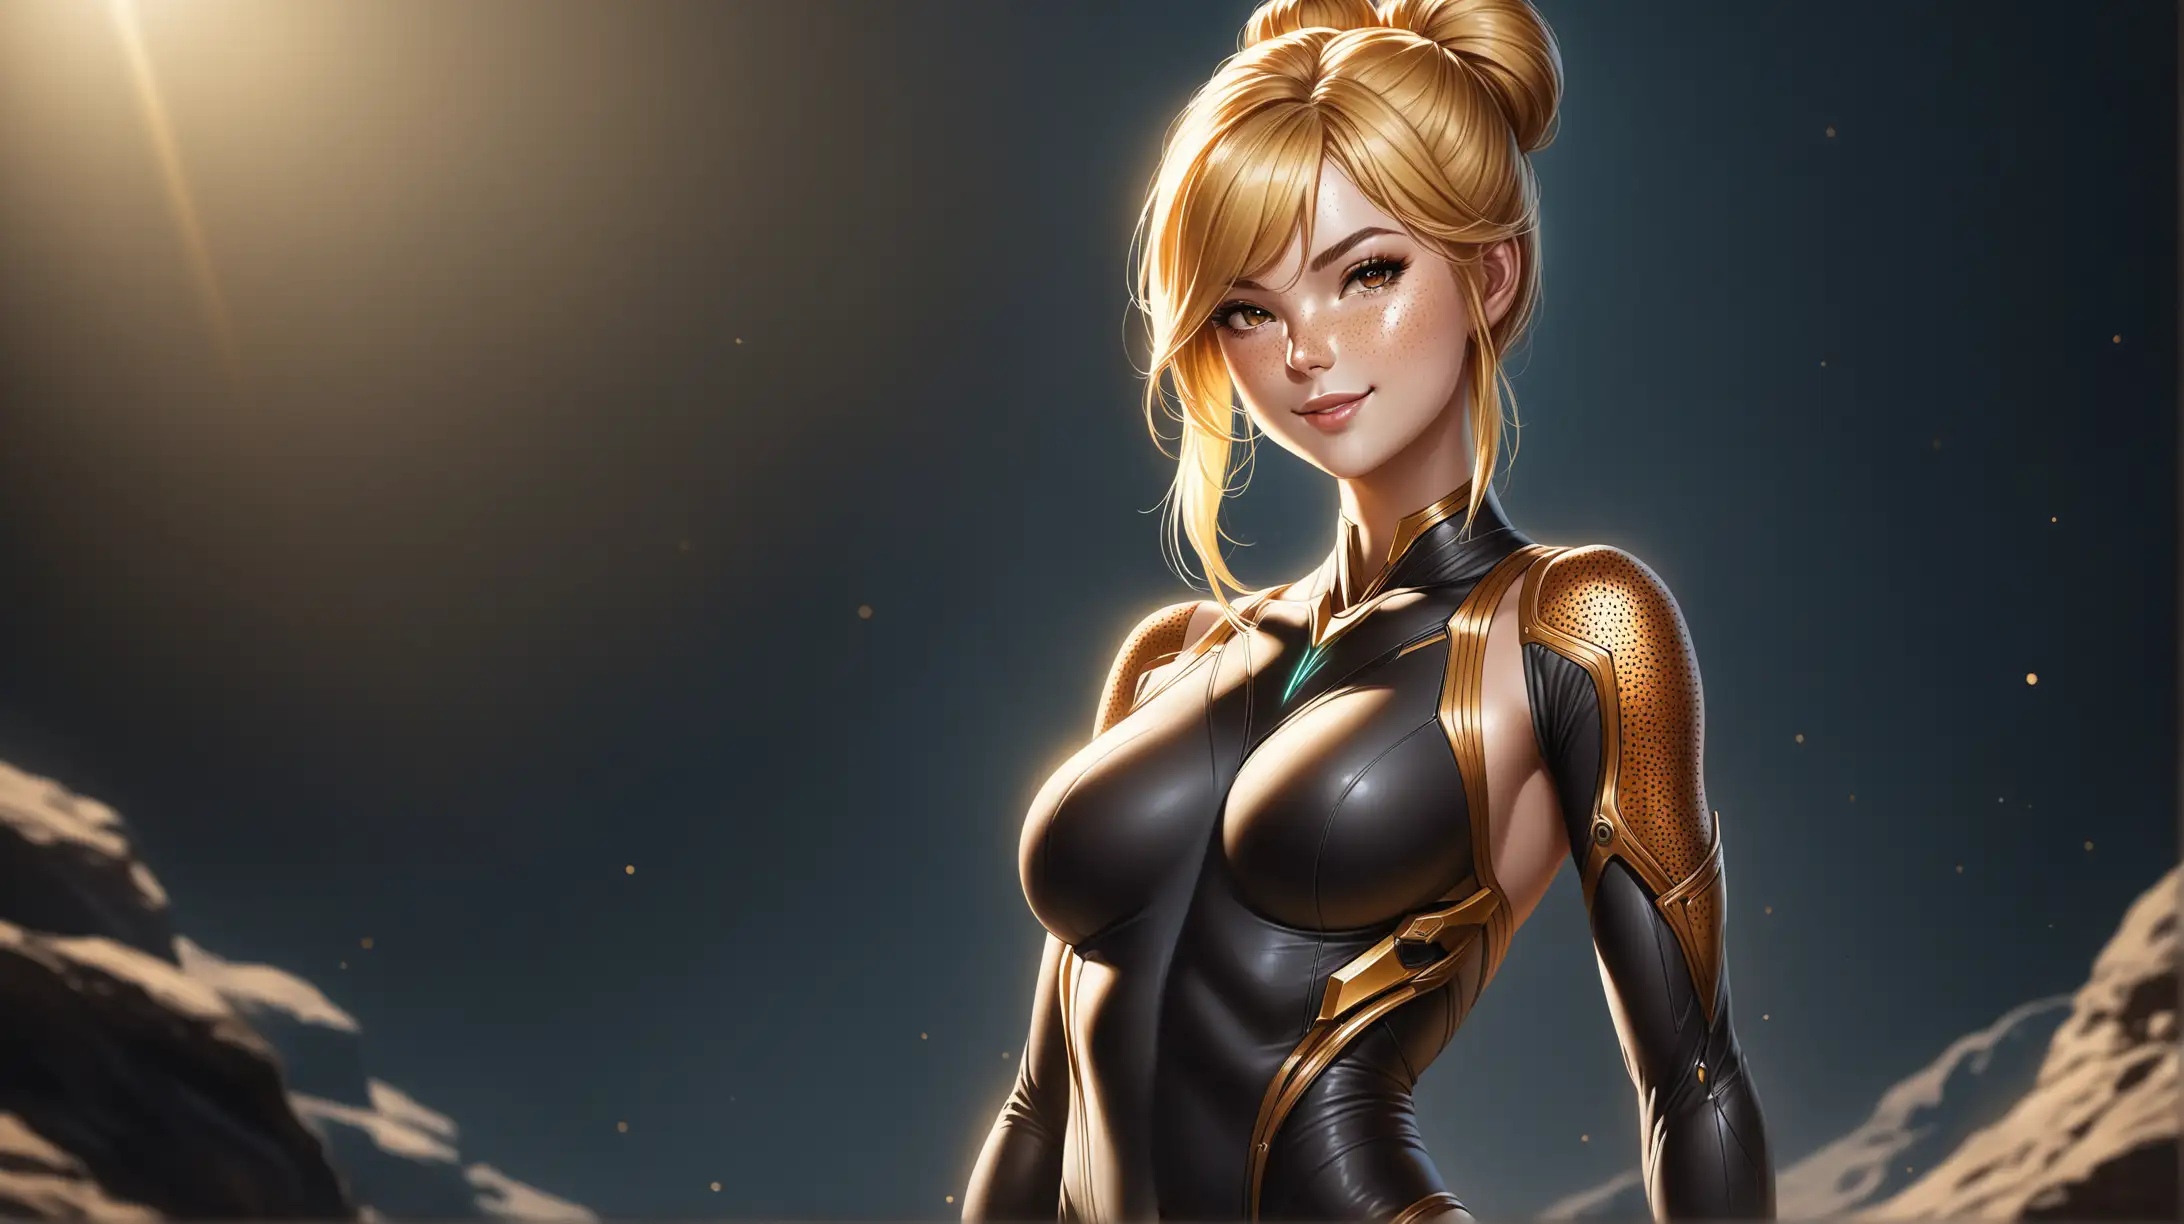 Seductive Blonde Woman in WarframeInspired Outfit Smiling Outdoors